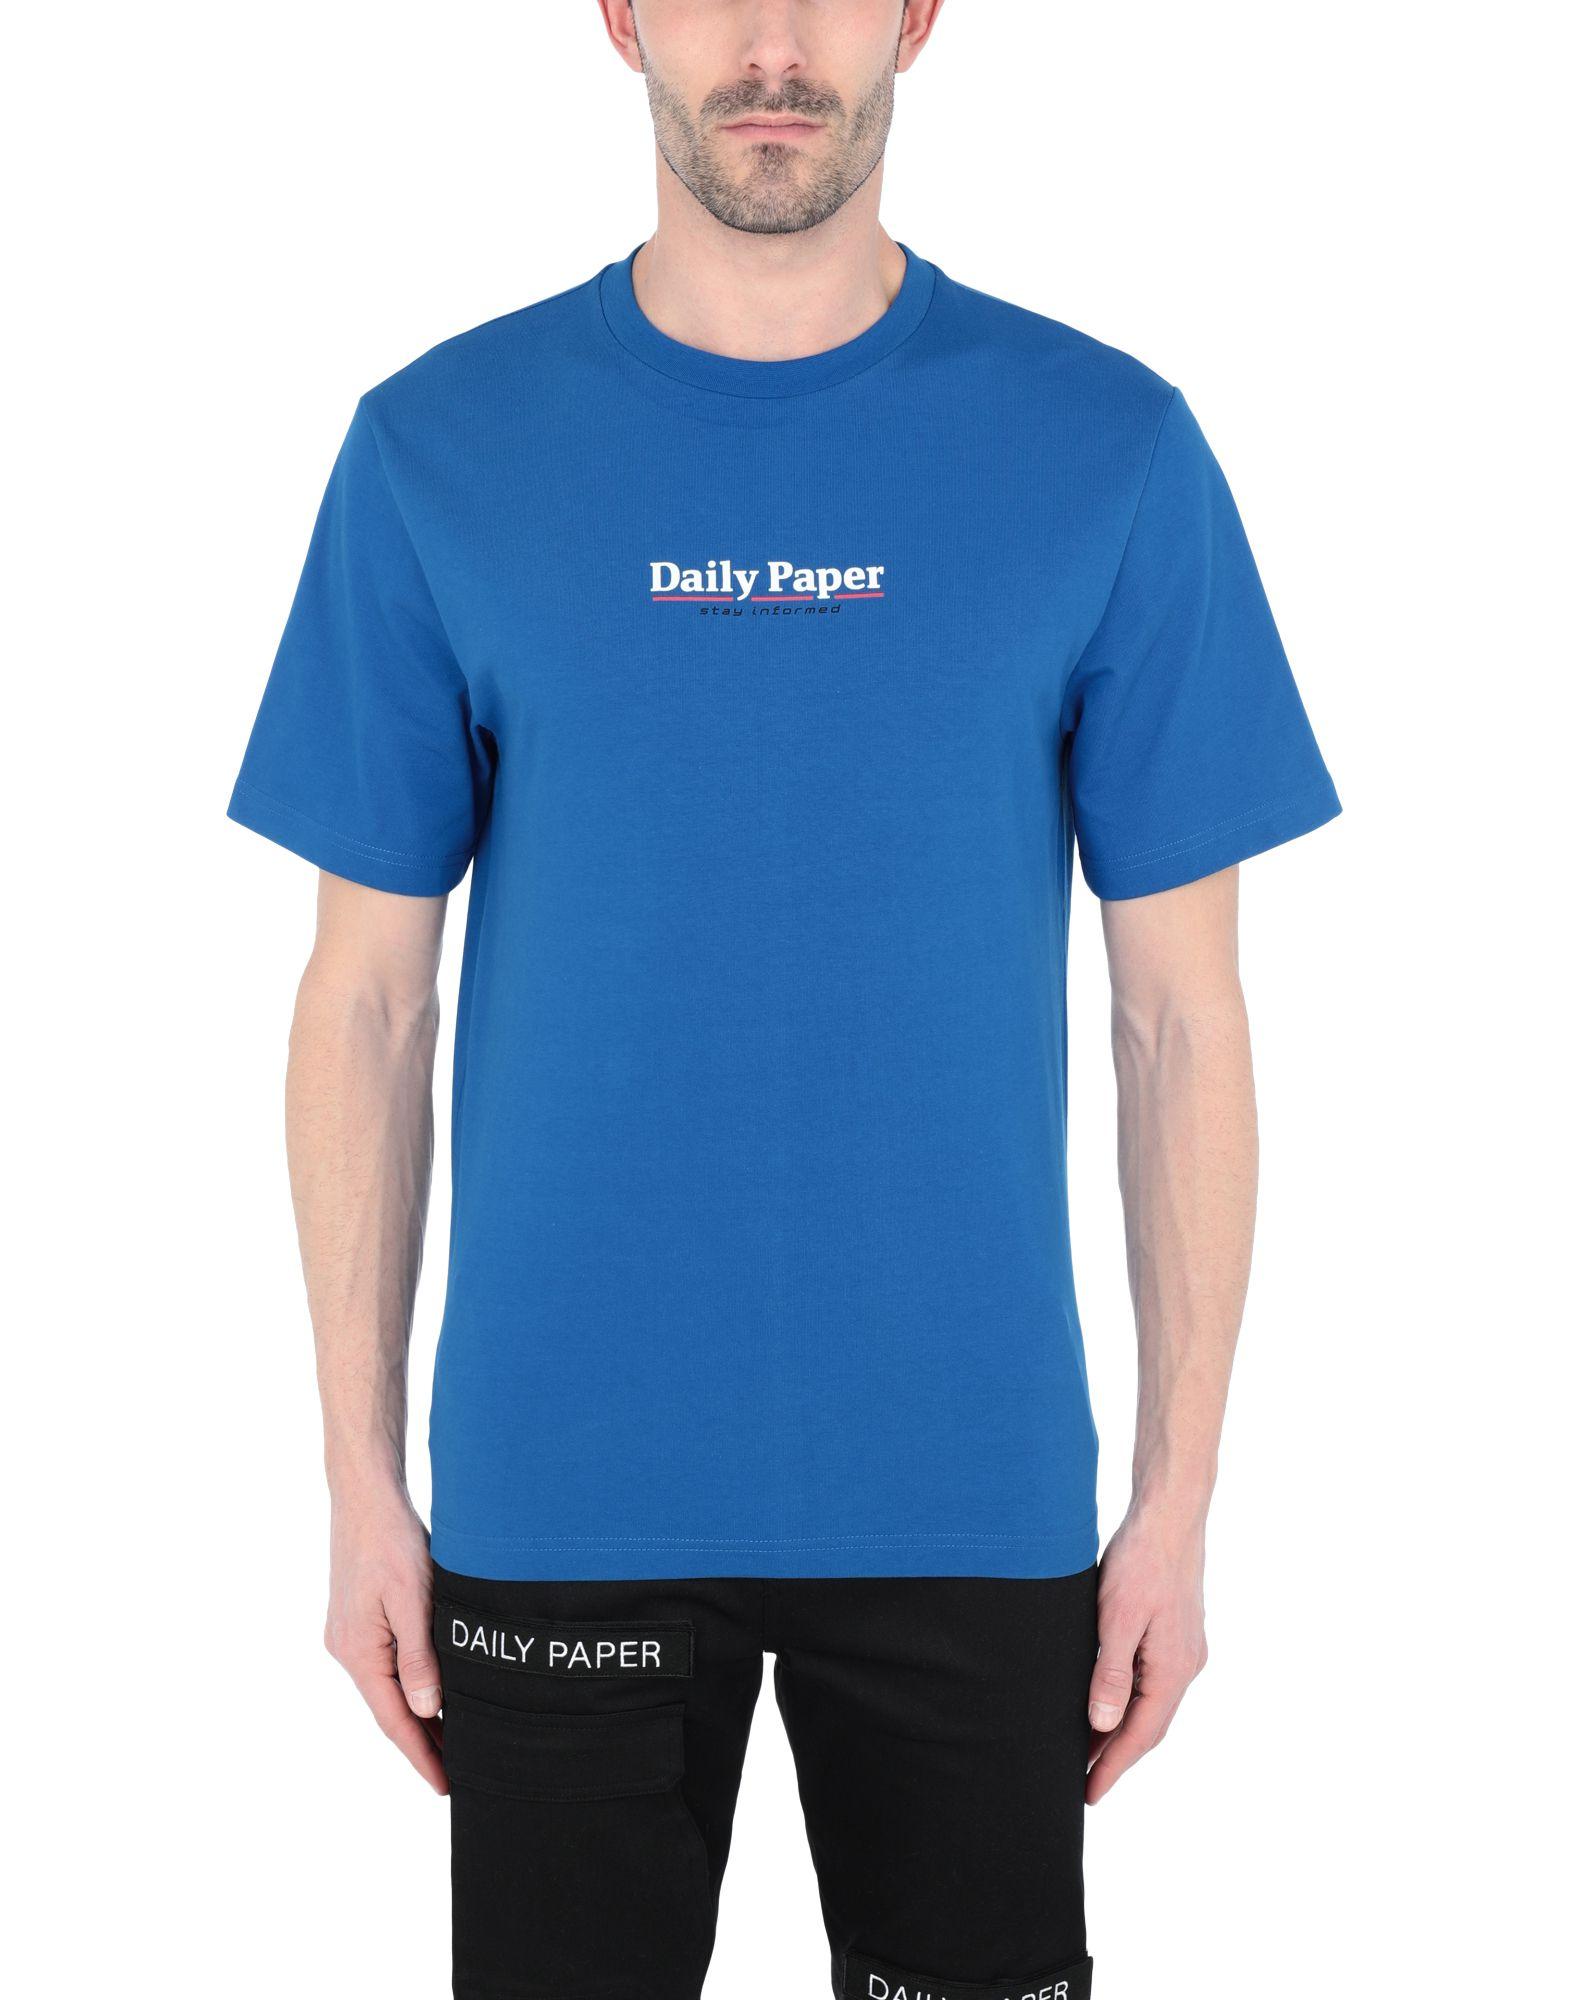 Daily Paper Cotton T-shirt in Bright Blue (Blue) for Men - Lyst